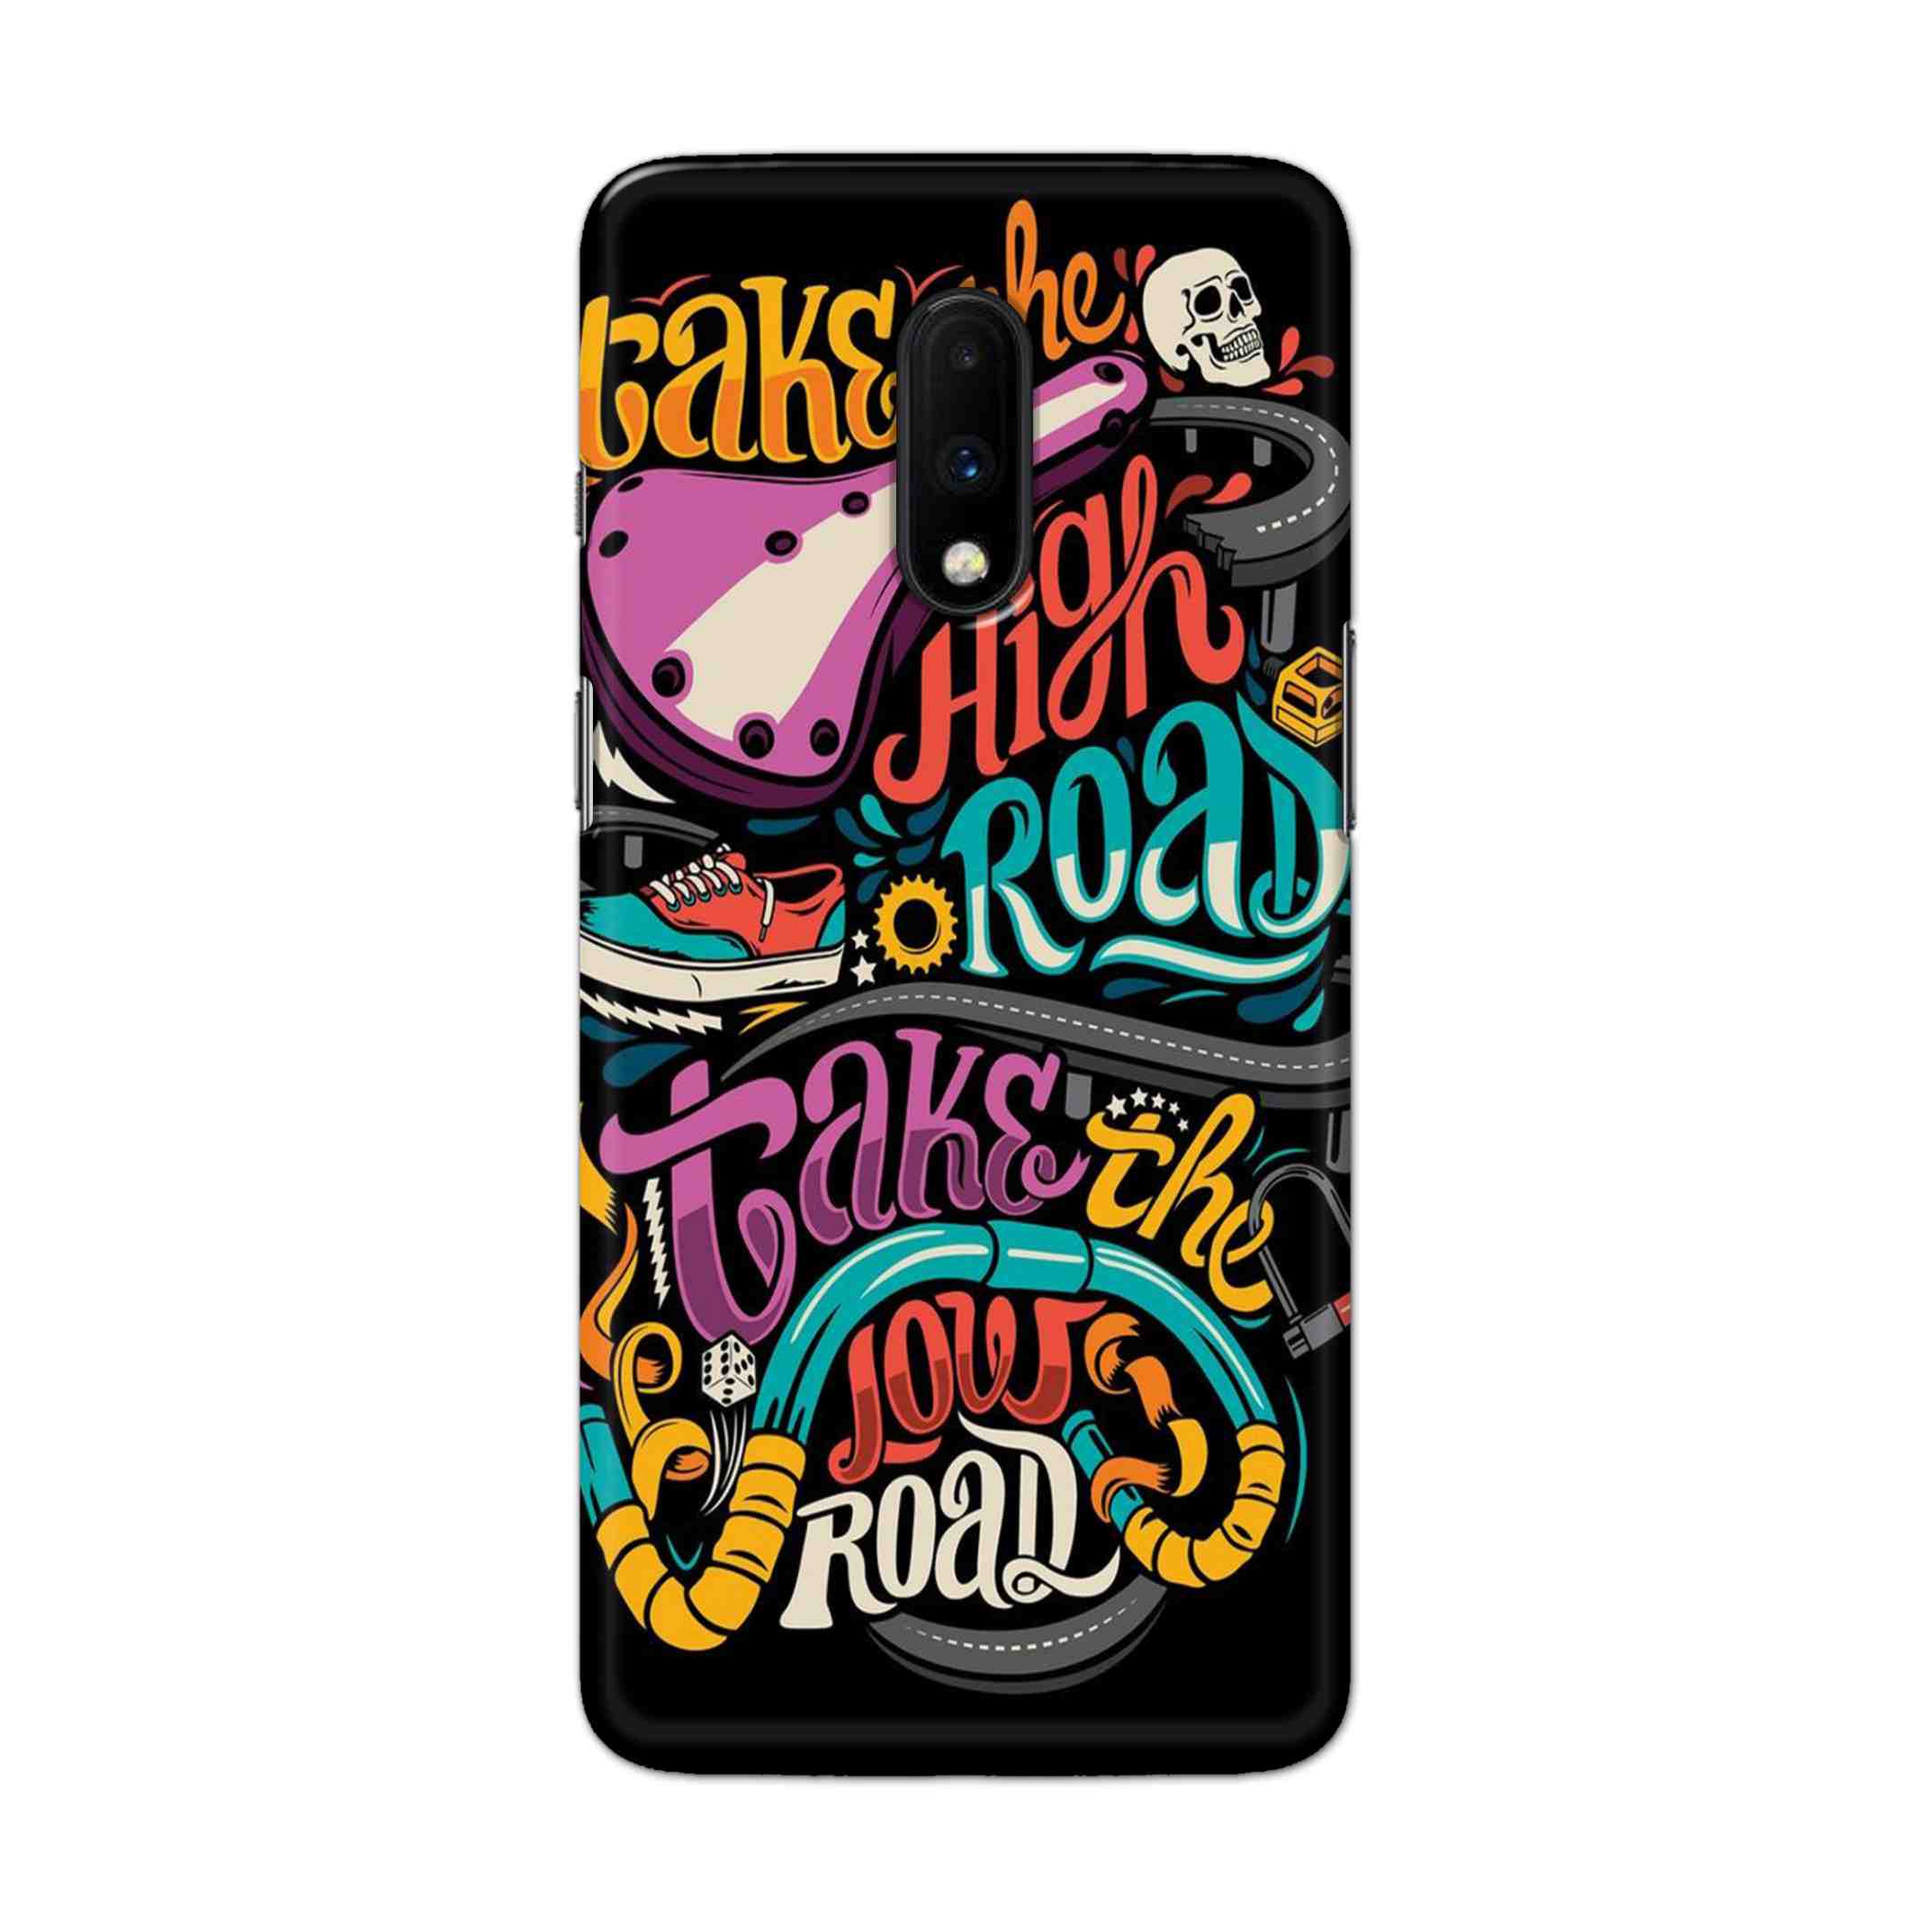 Buy Take The High Road Hard Back Mobile Phone Case Cover For OnePlus 7 Online